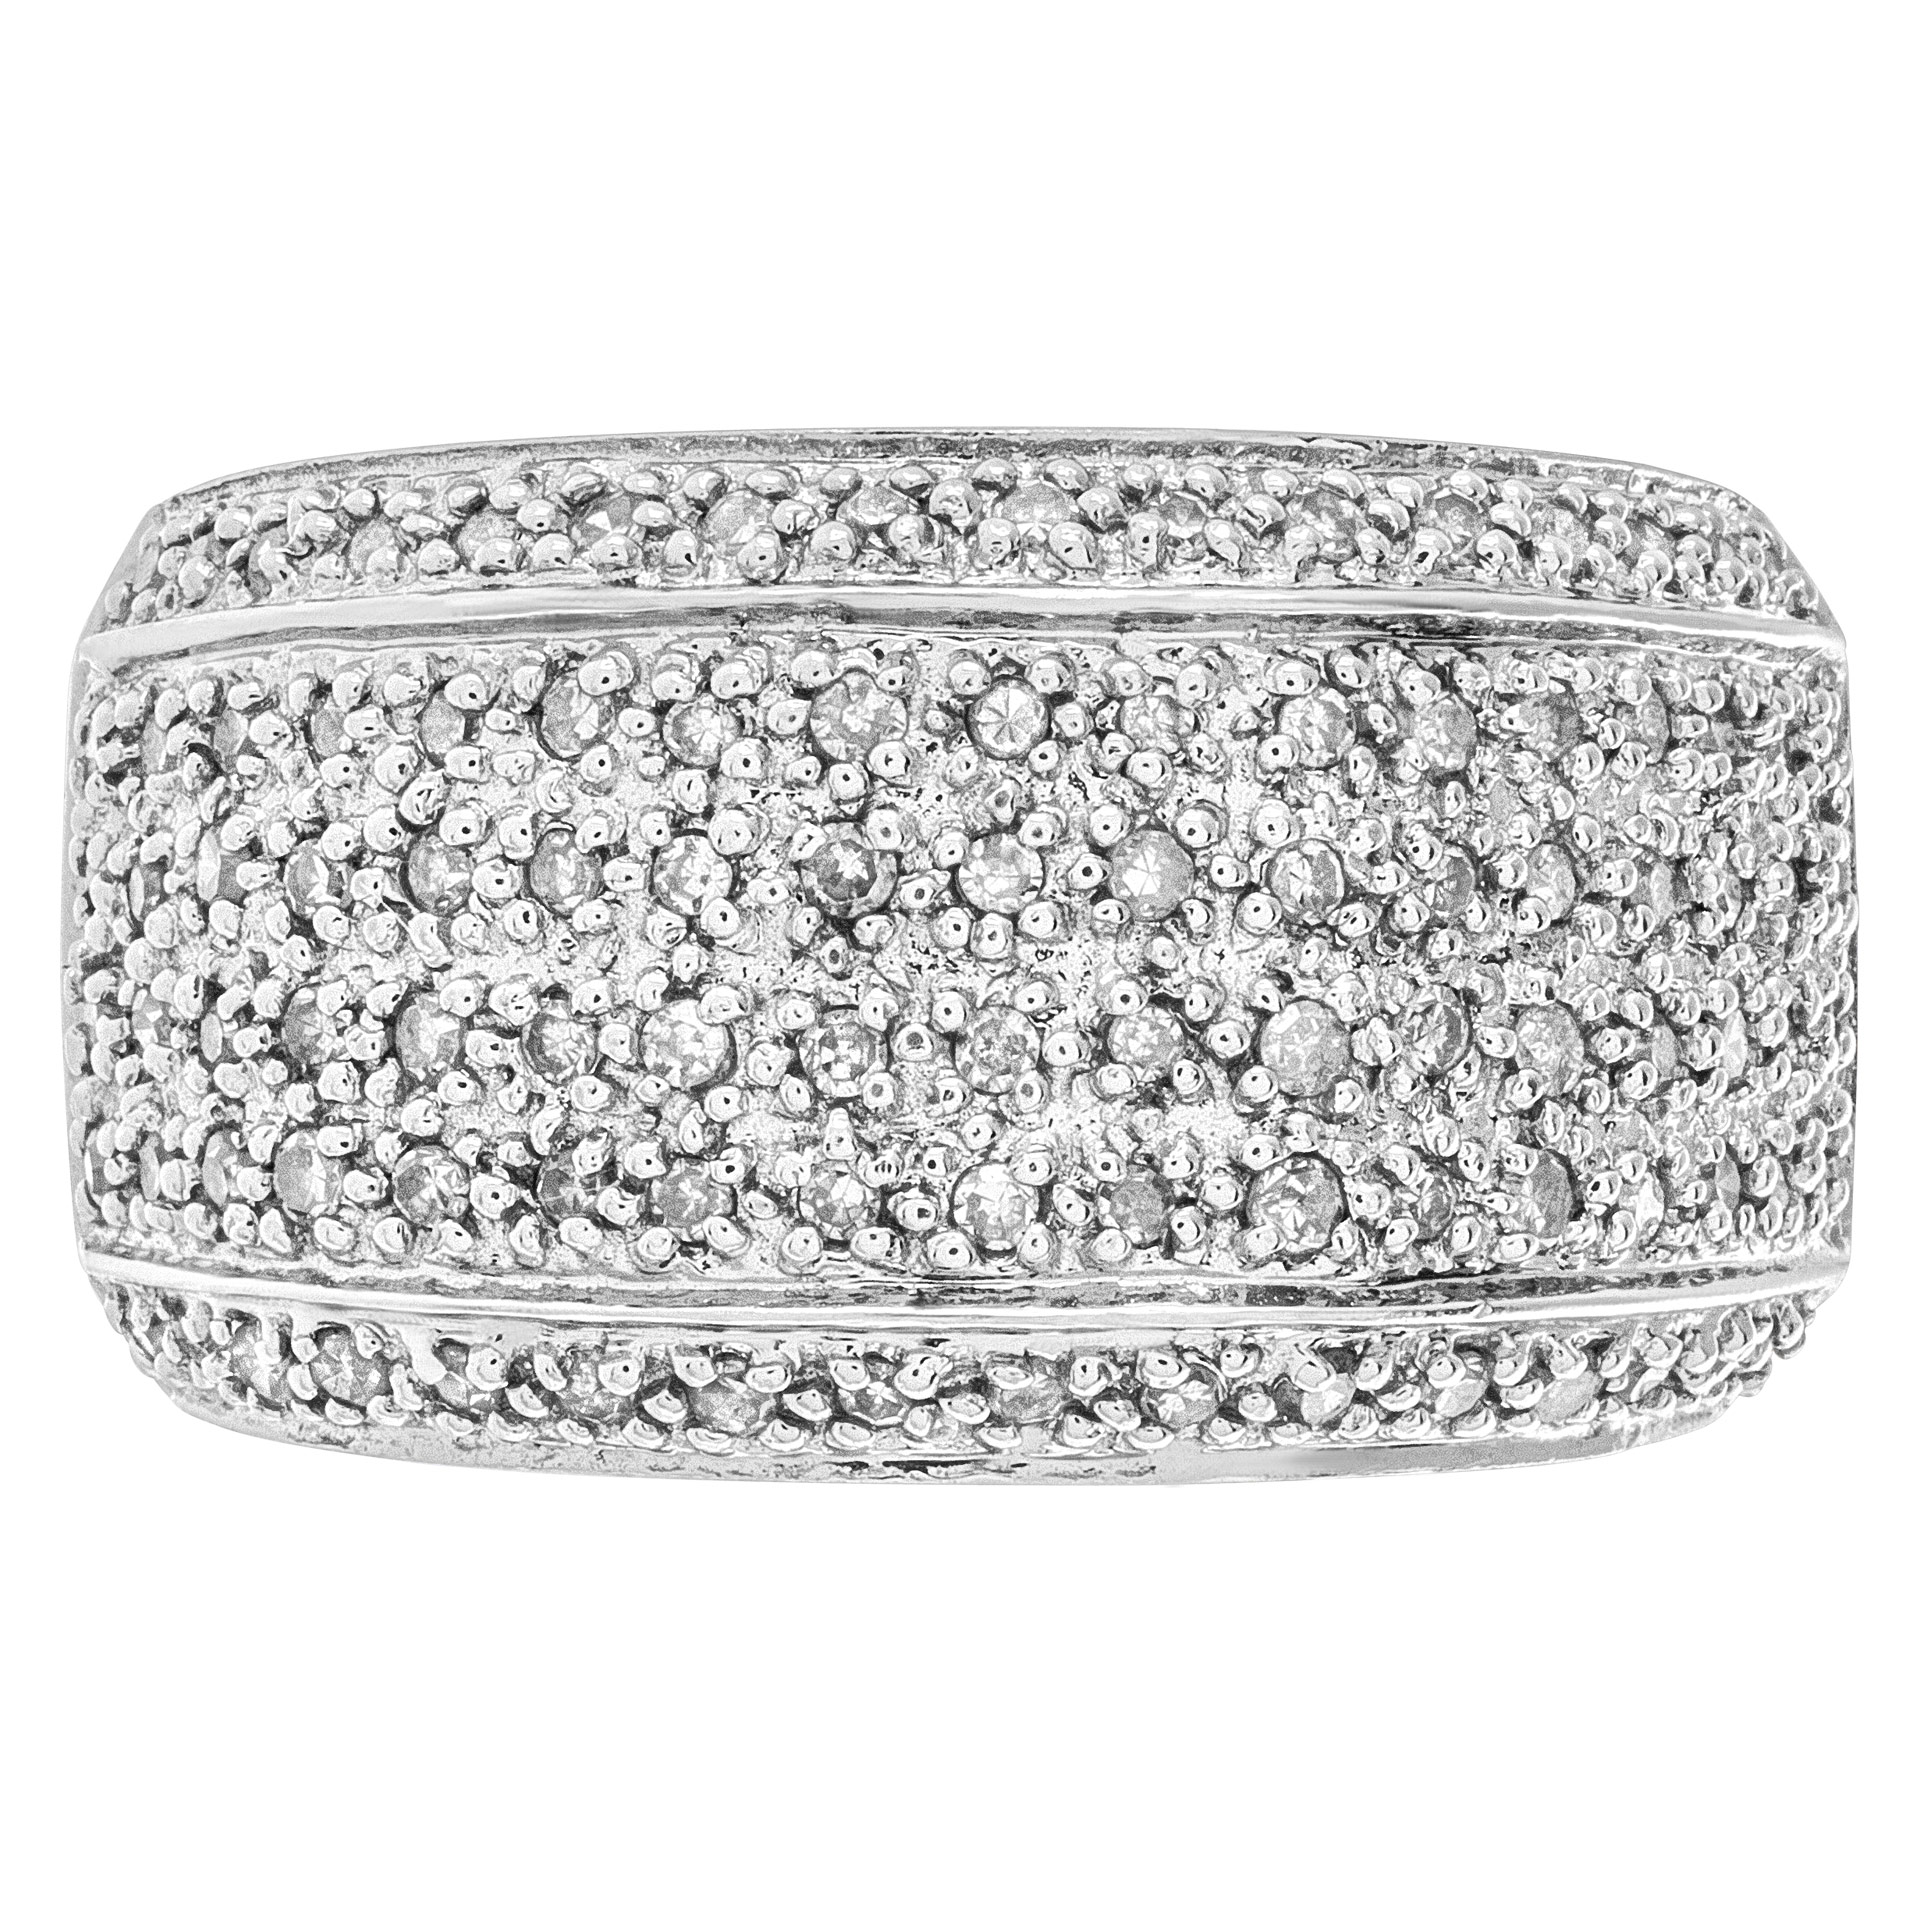 Pave Diamond Ring in 14k white gold with approx. 0.96 carats in diamonds image 1